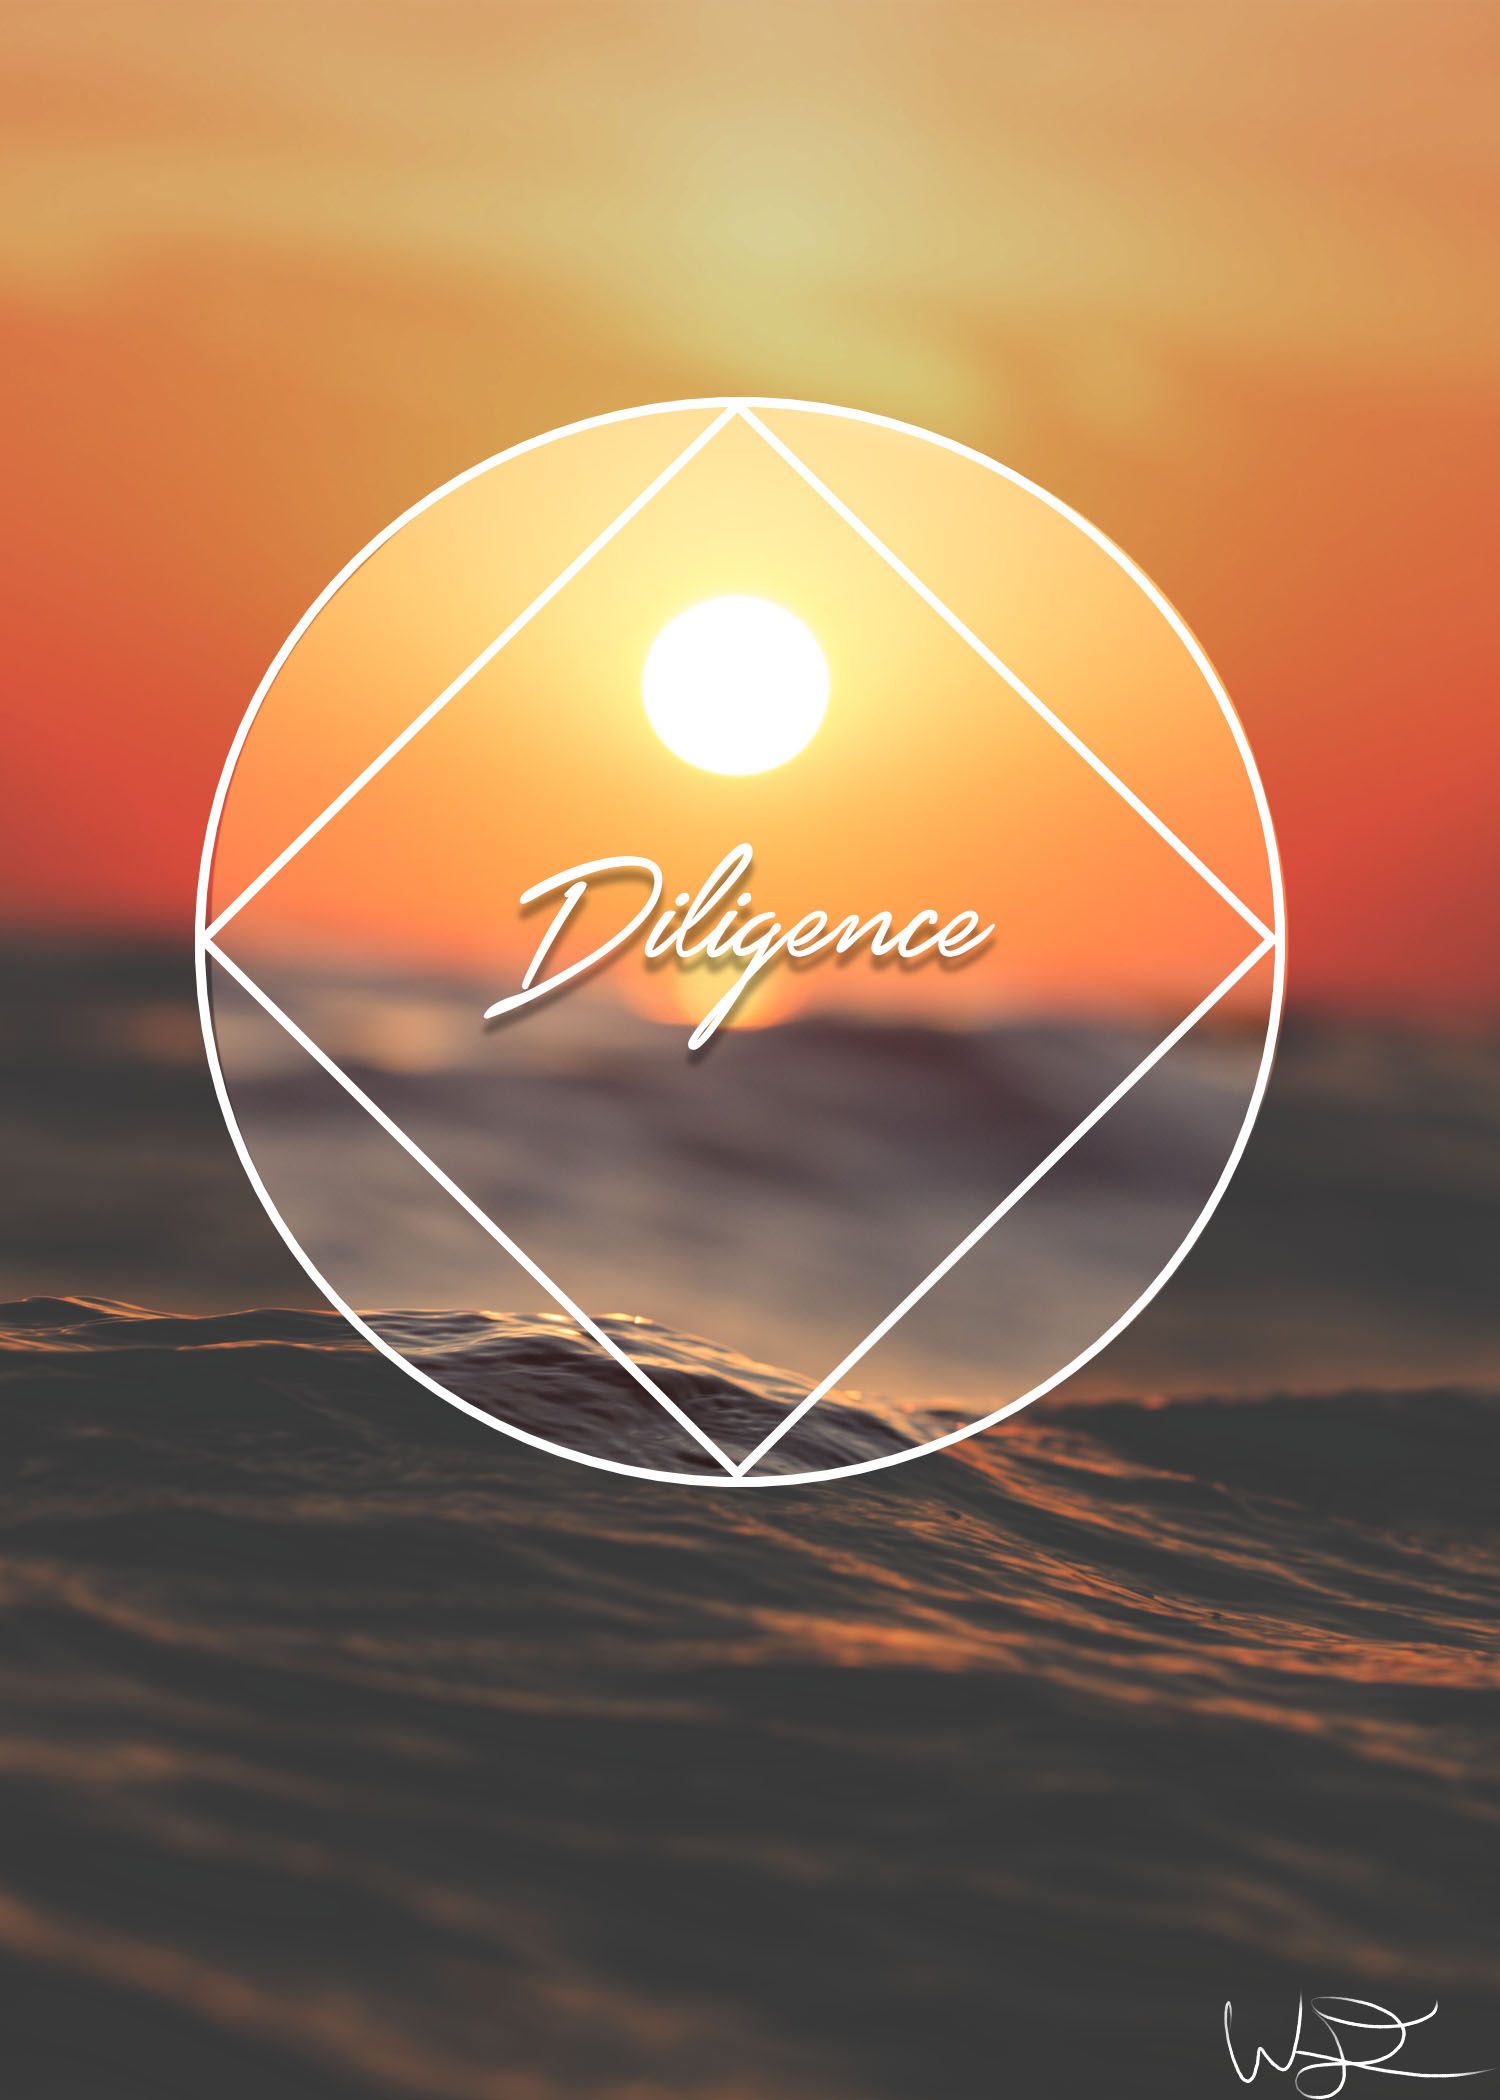 Diligence Wallpaper For iPhone Or Android